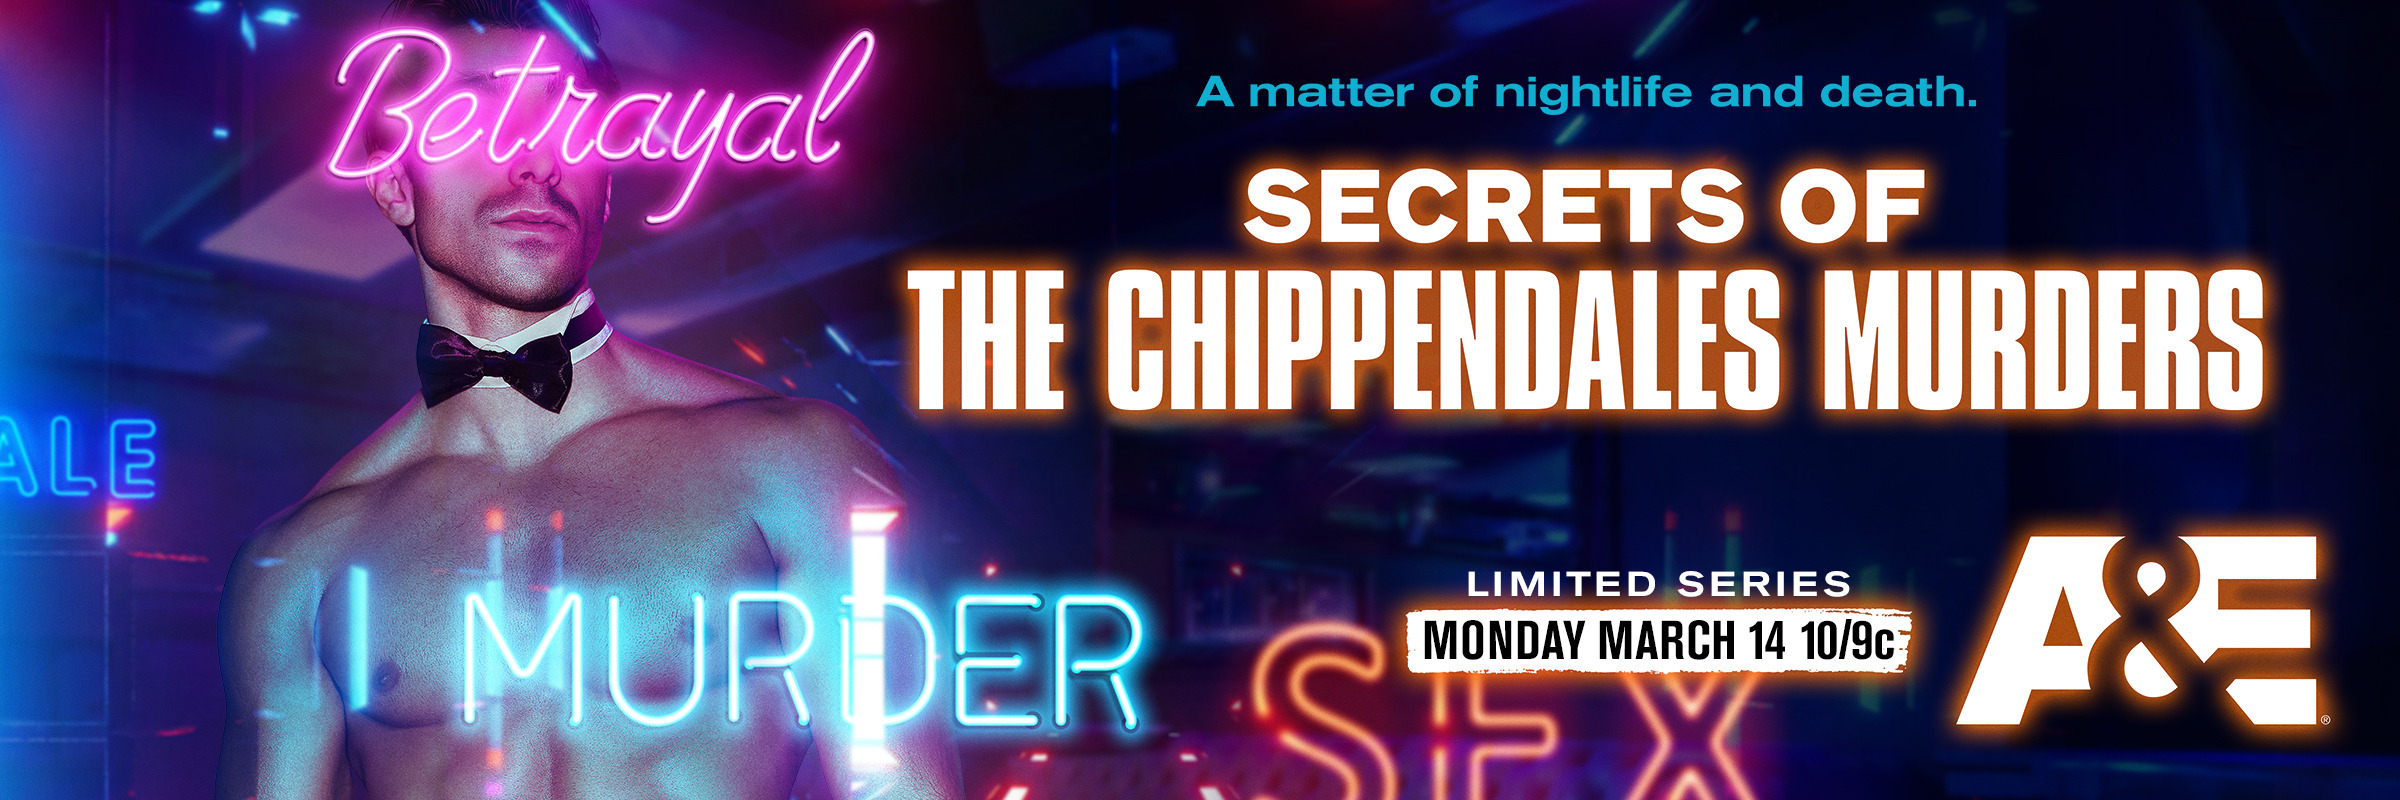 Mega Sized Movie Poster Image for Secrets of the Chippendales Murders (#2 of 2)